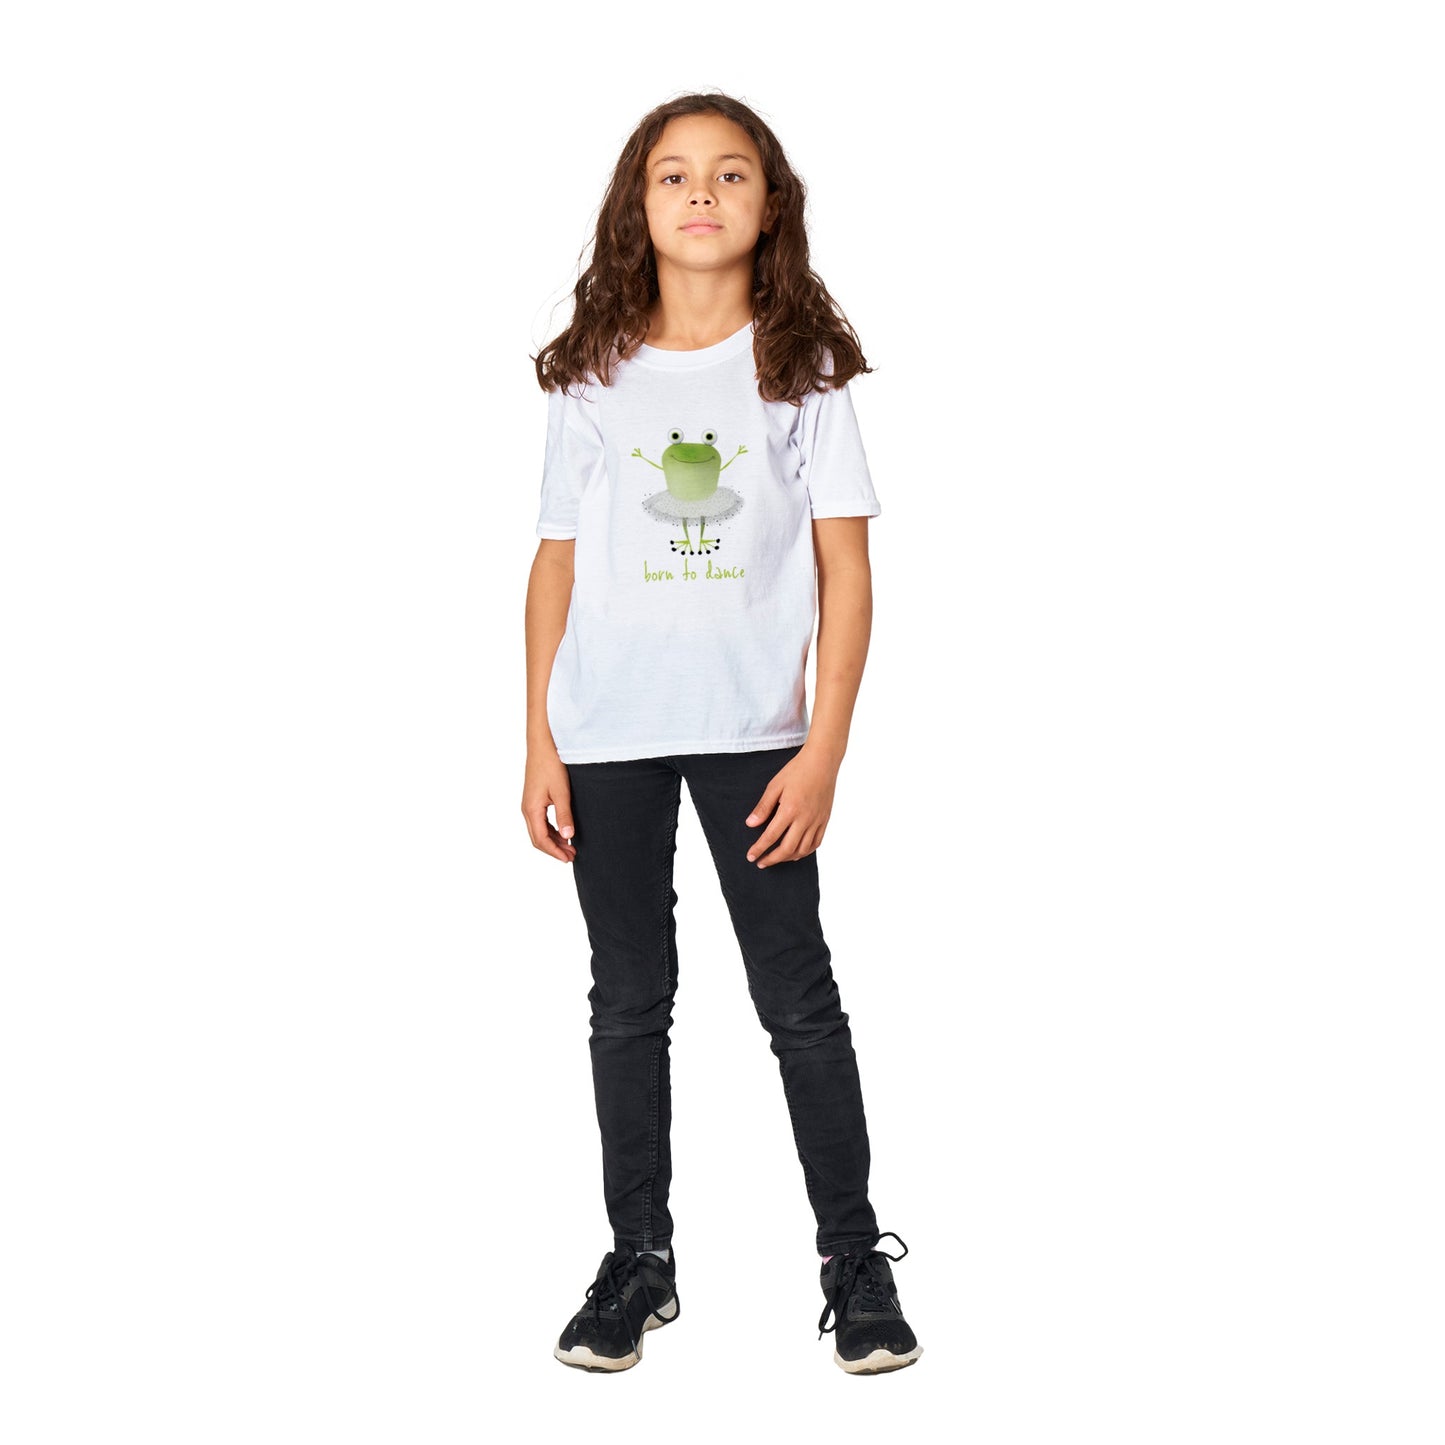 Born to Dance Classic Kids Crewneck T-shirt with Ballerina Frog Print - The Perfect Addition to Your Child's Dance Wardrobe!